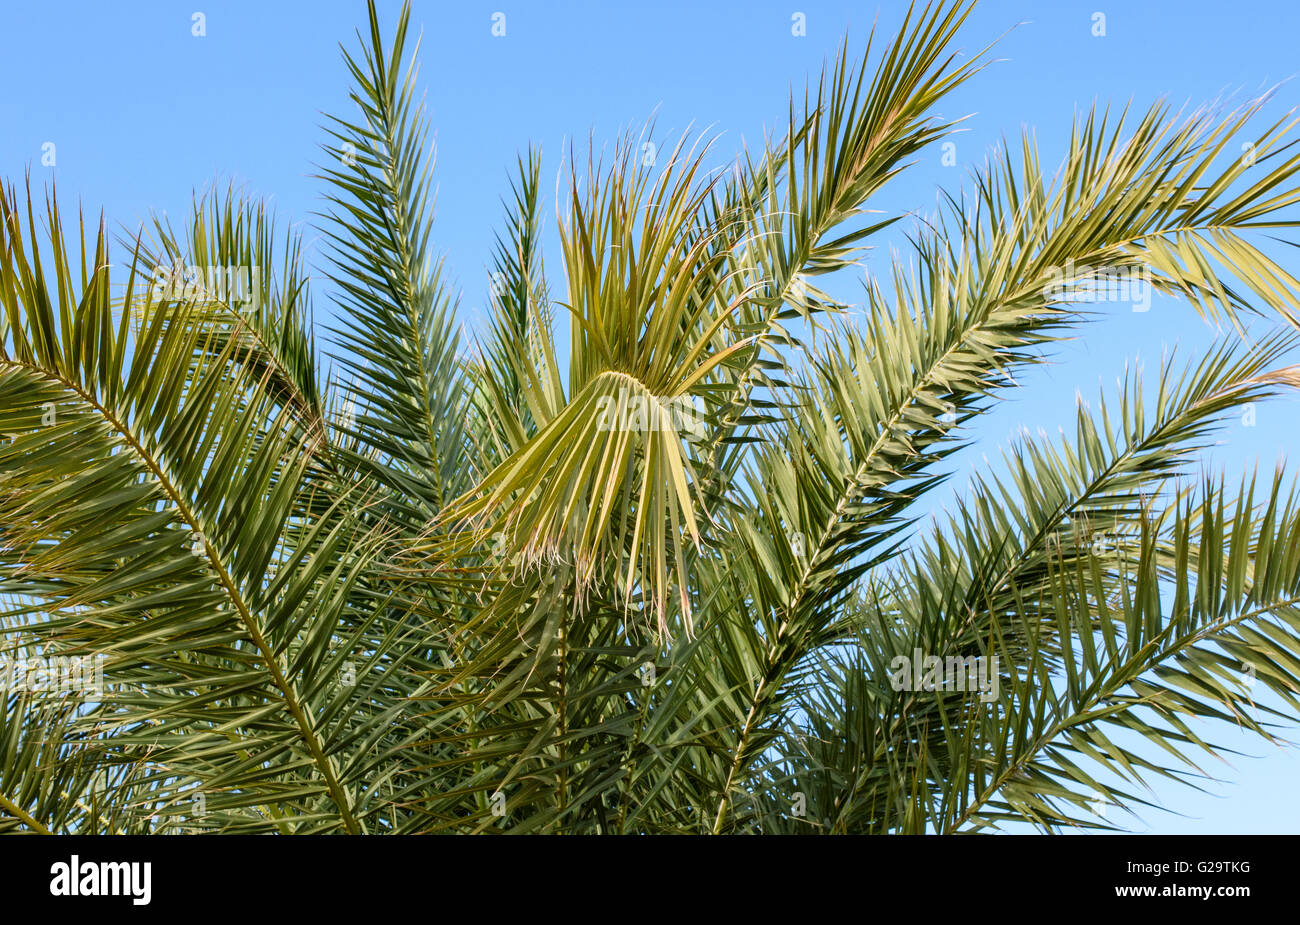 Palm tree fronds photographed against a bright blue sky Stock Photo